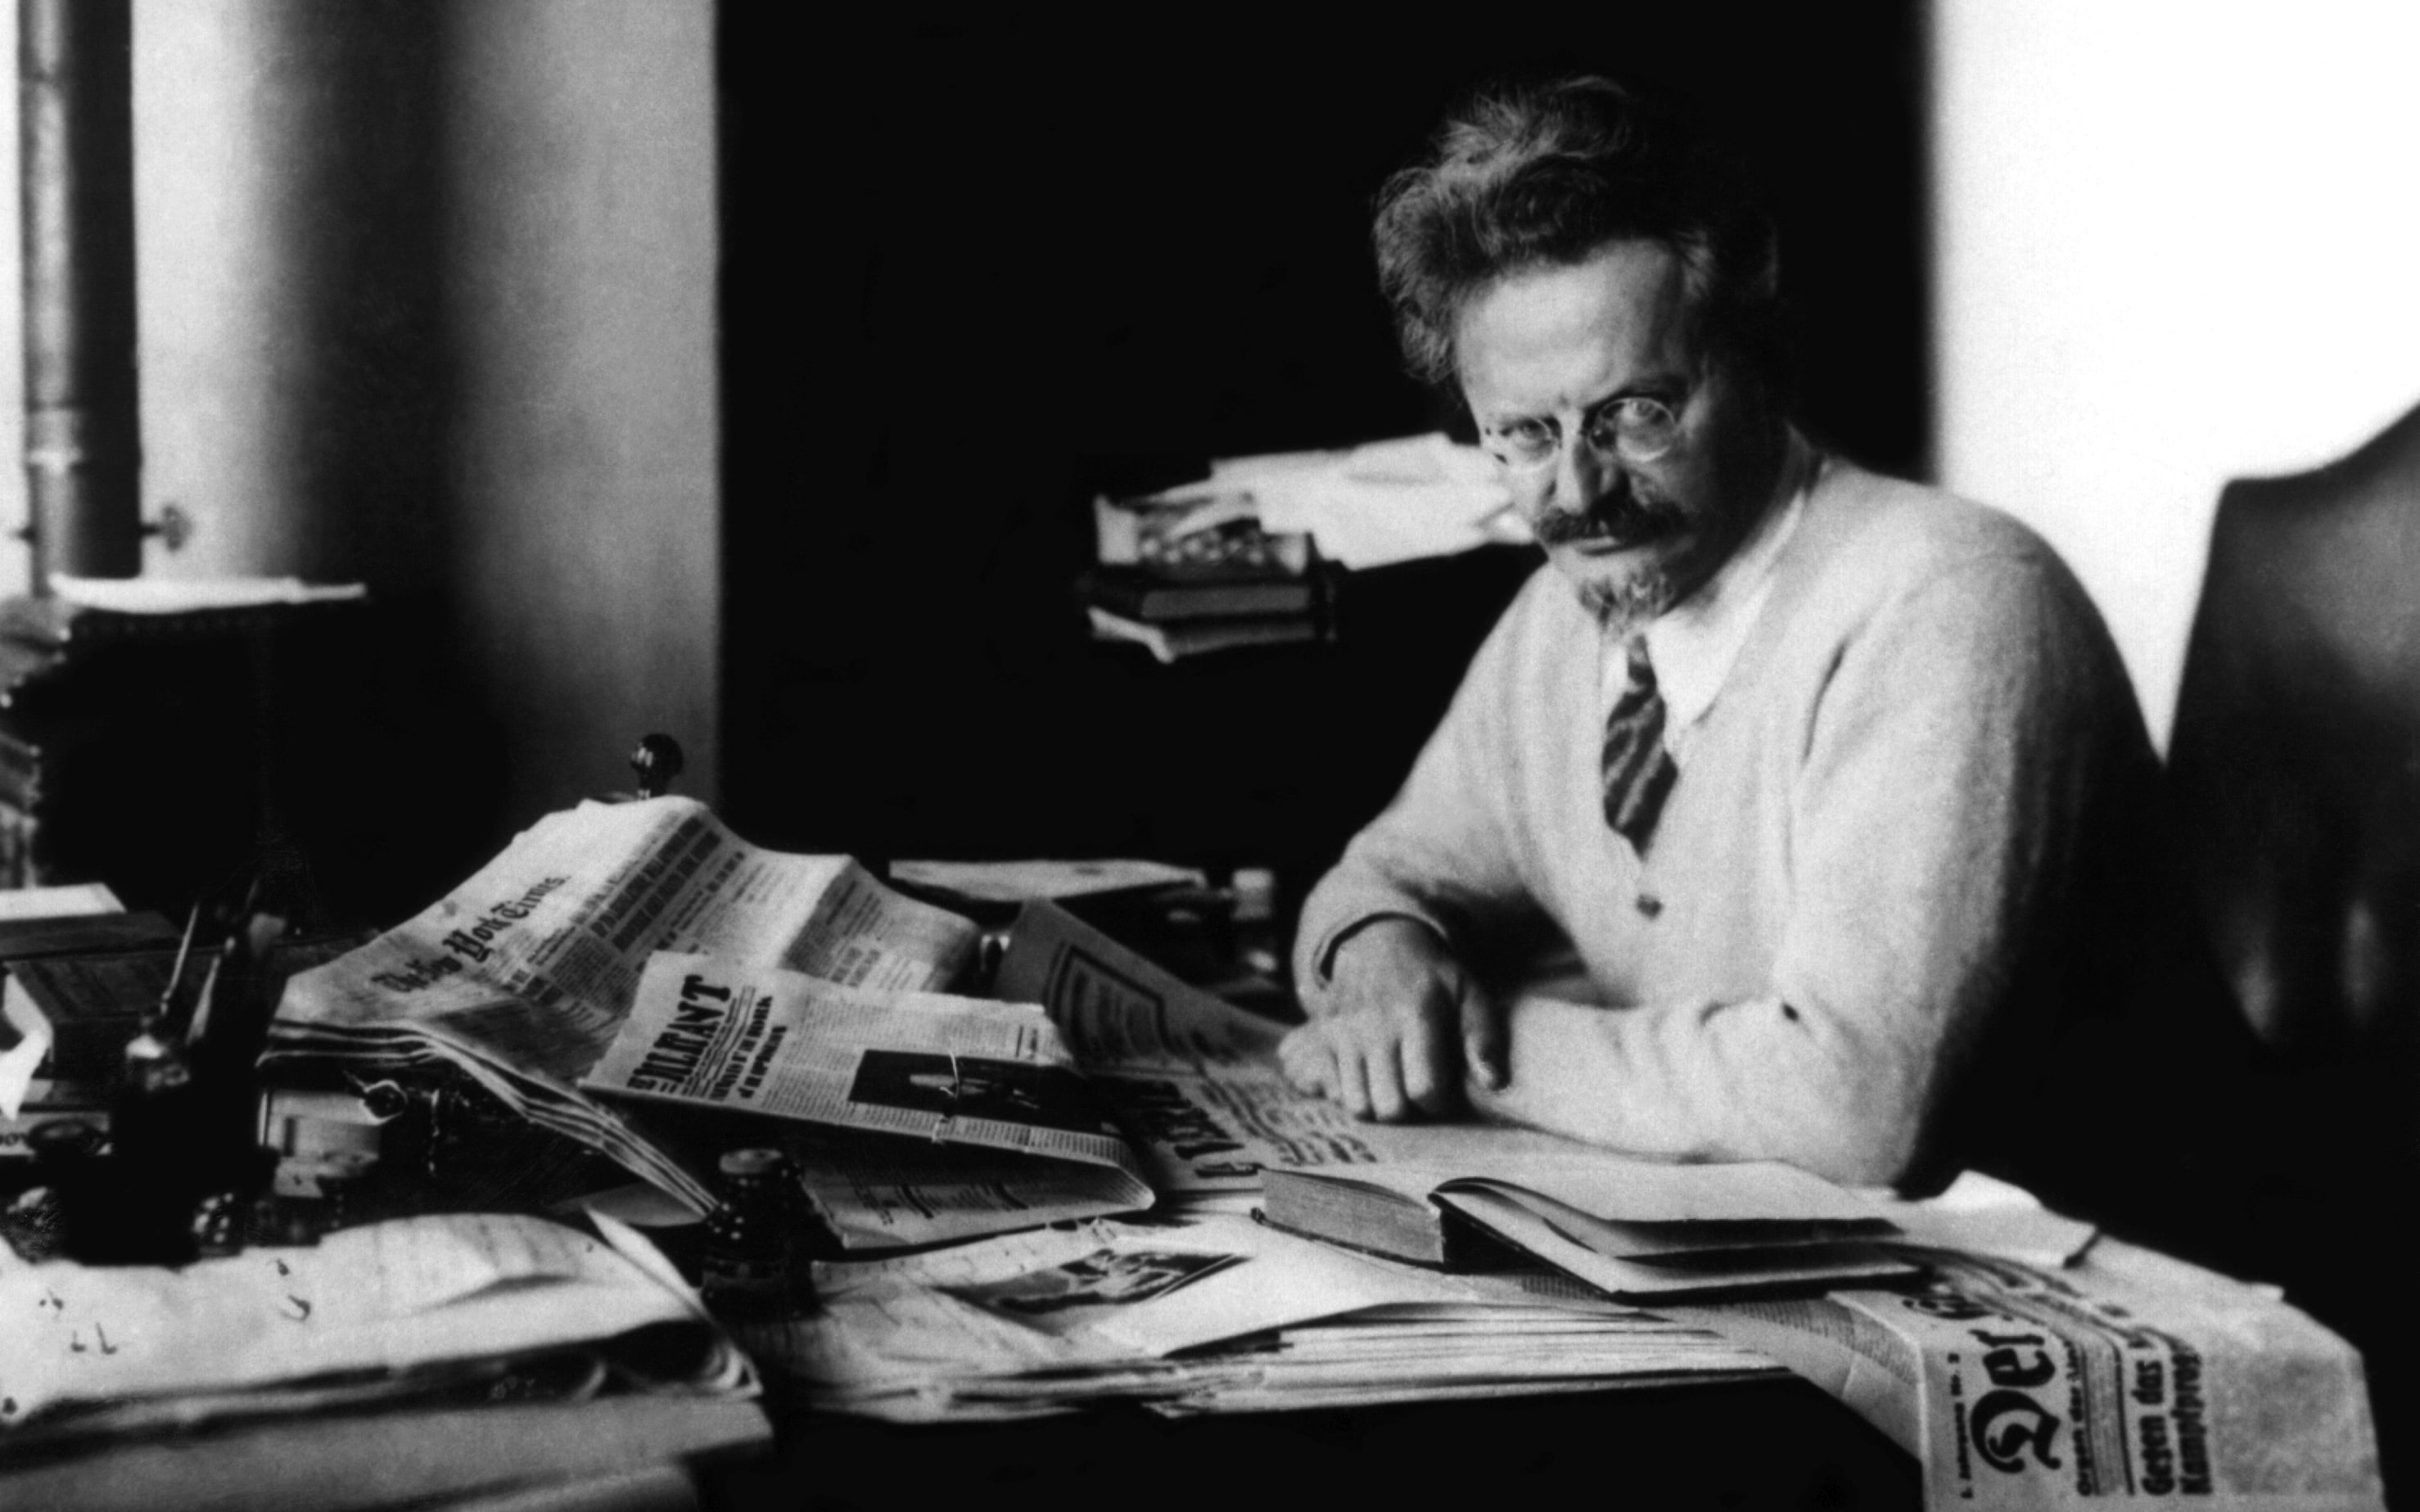 Leon Trotsky, looking at viewer, men, monochrome, historic